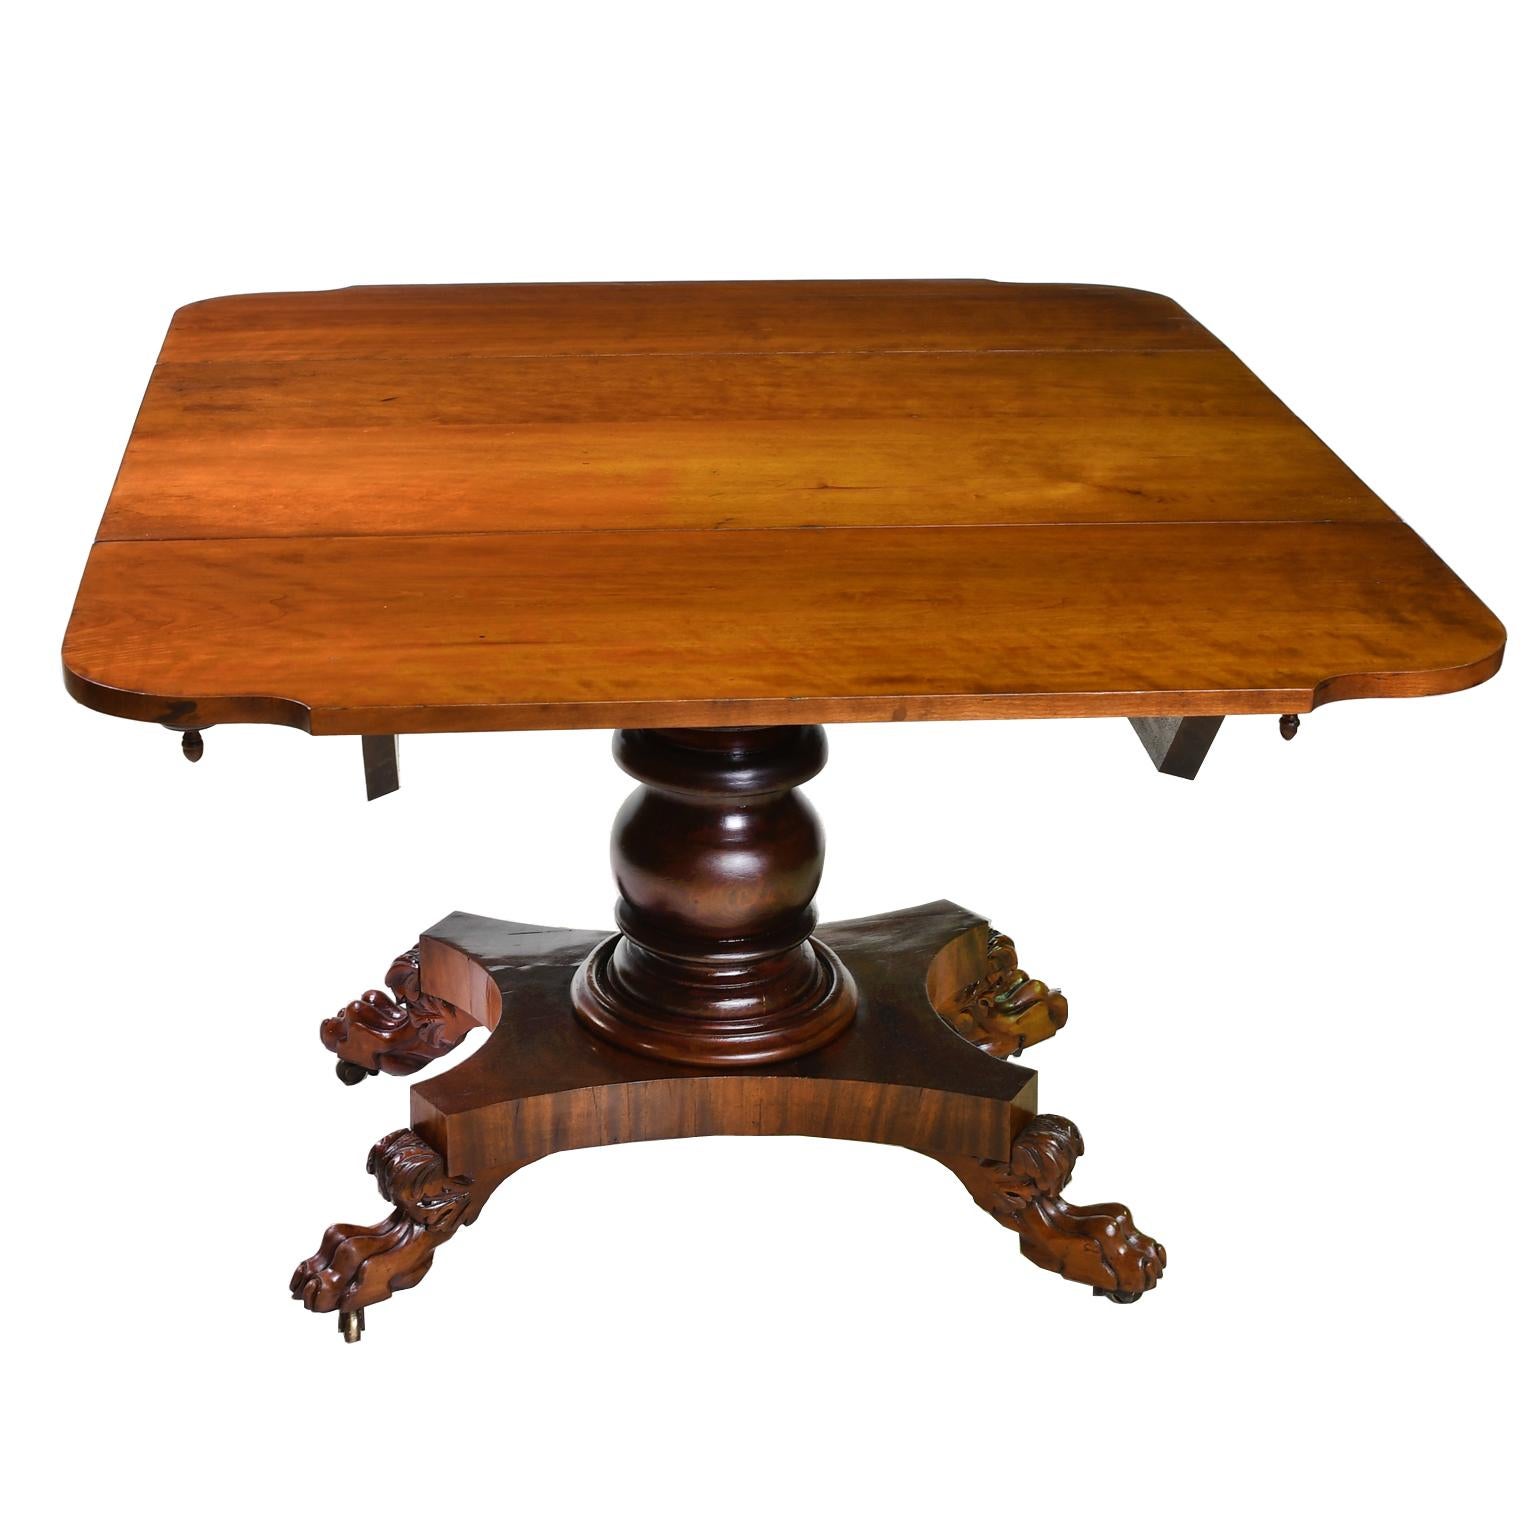 Early American Empire Drop-Leaf/ Pembroke Table in West Indies Mahogany, c. 1830 For Sale 2